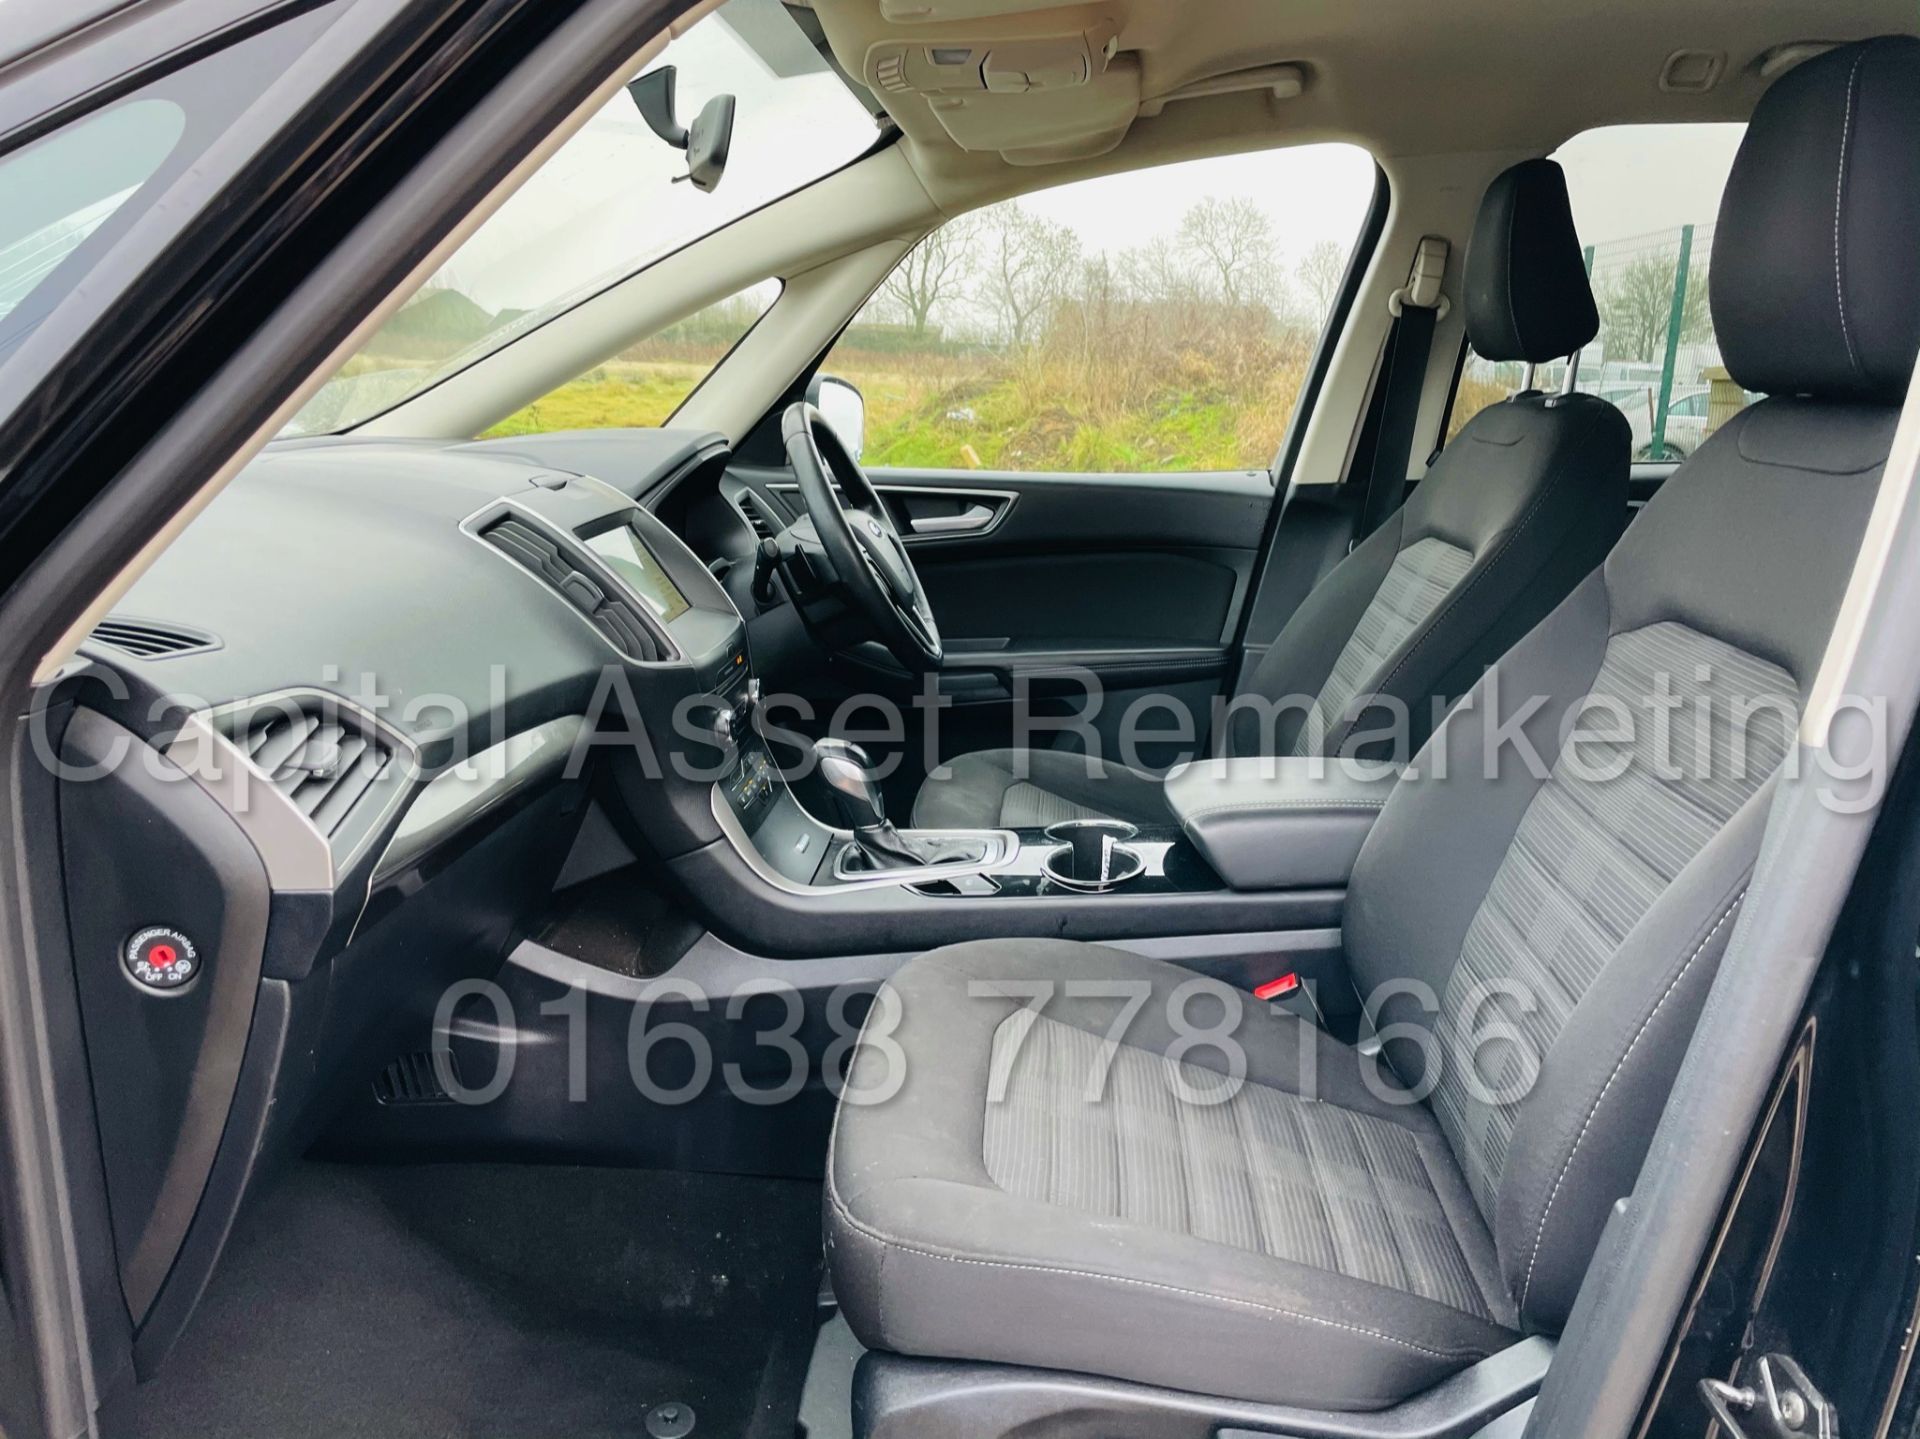 ON SALE FORD GALAXY *ZETEC EDITION* 7 SEATER MPV (2017 - EURO 6) '2.0 TDCI - AUTO' (- FULL HISTORY) - Image 22 of 48